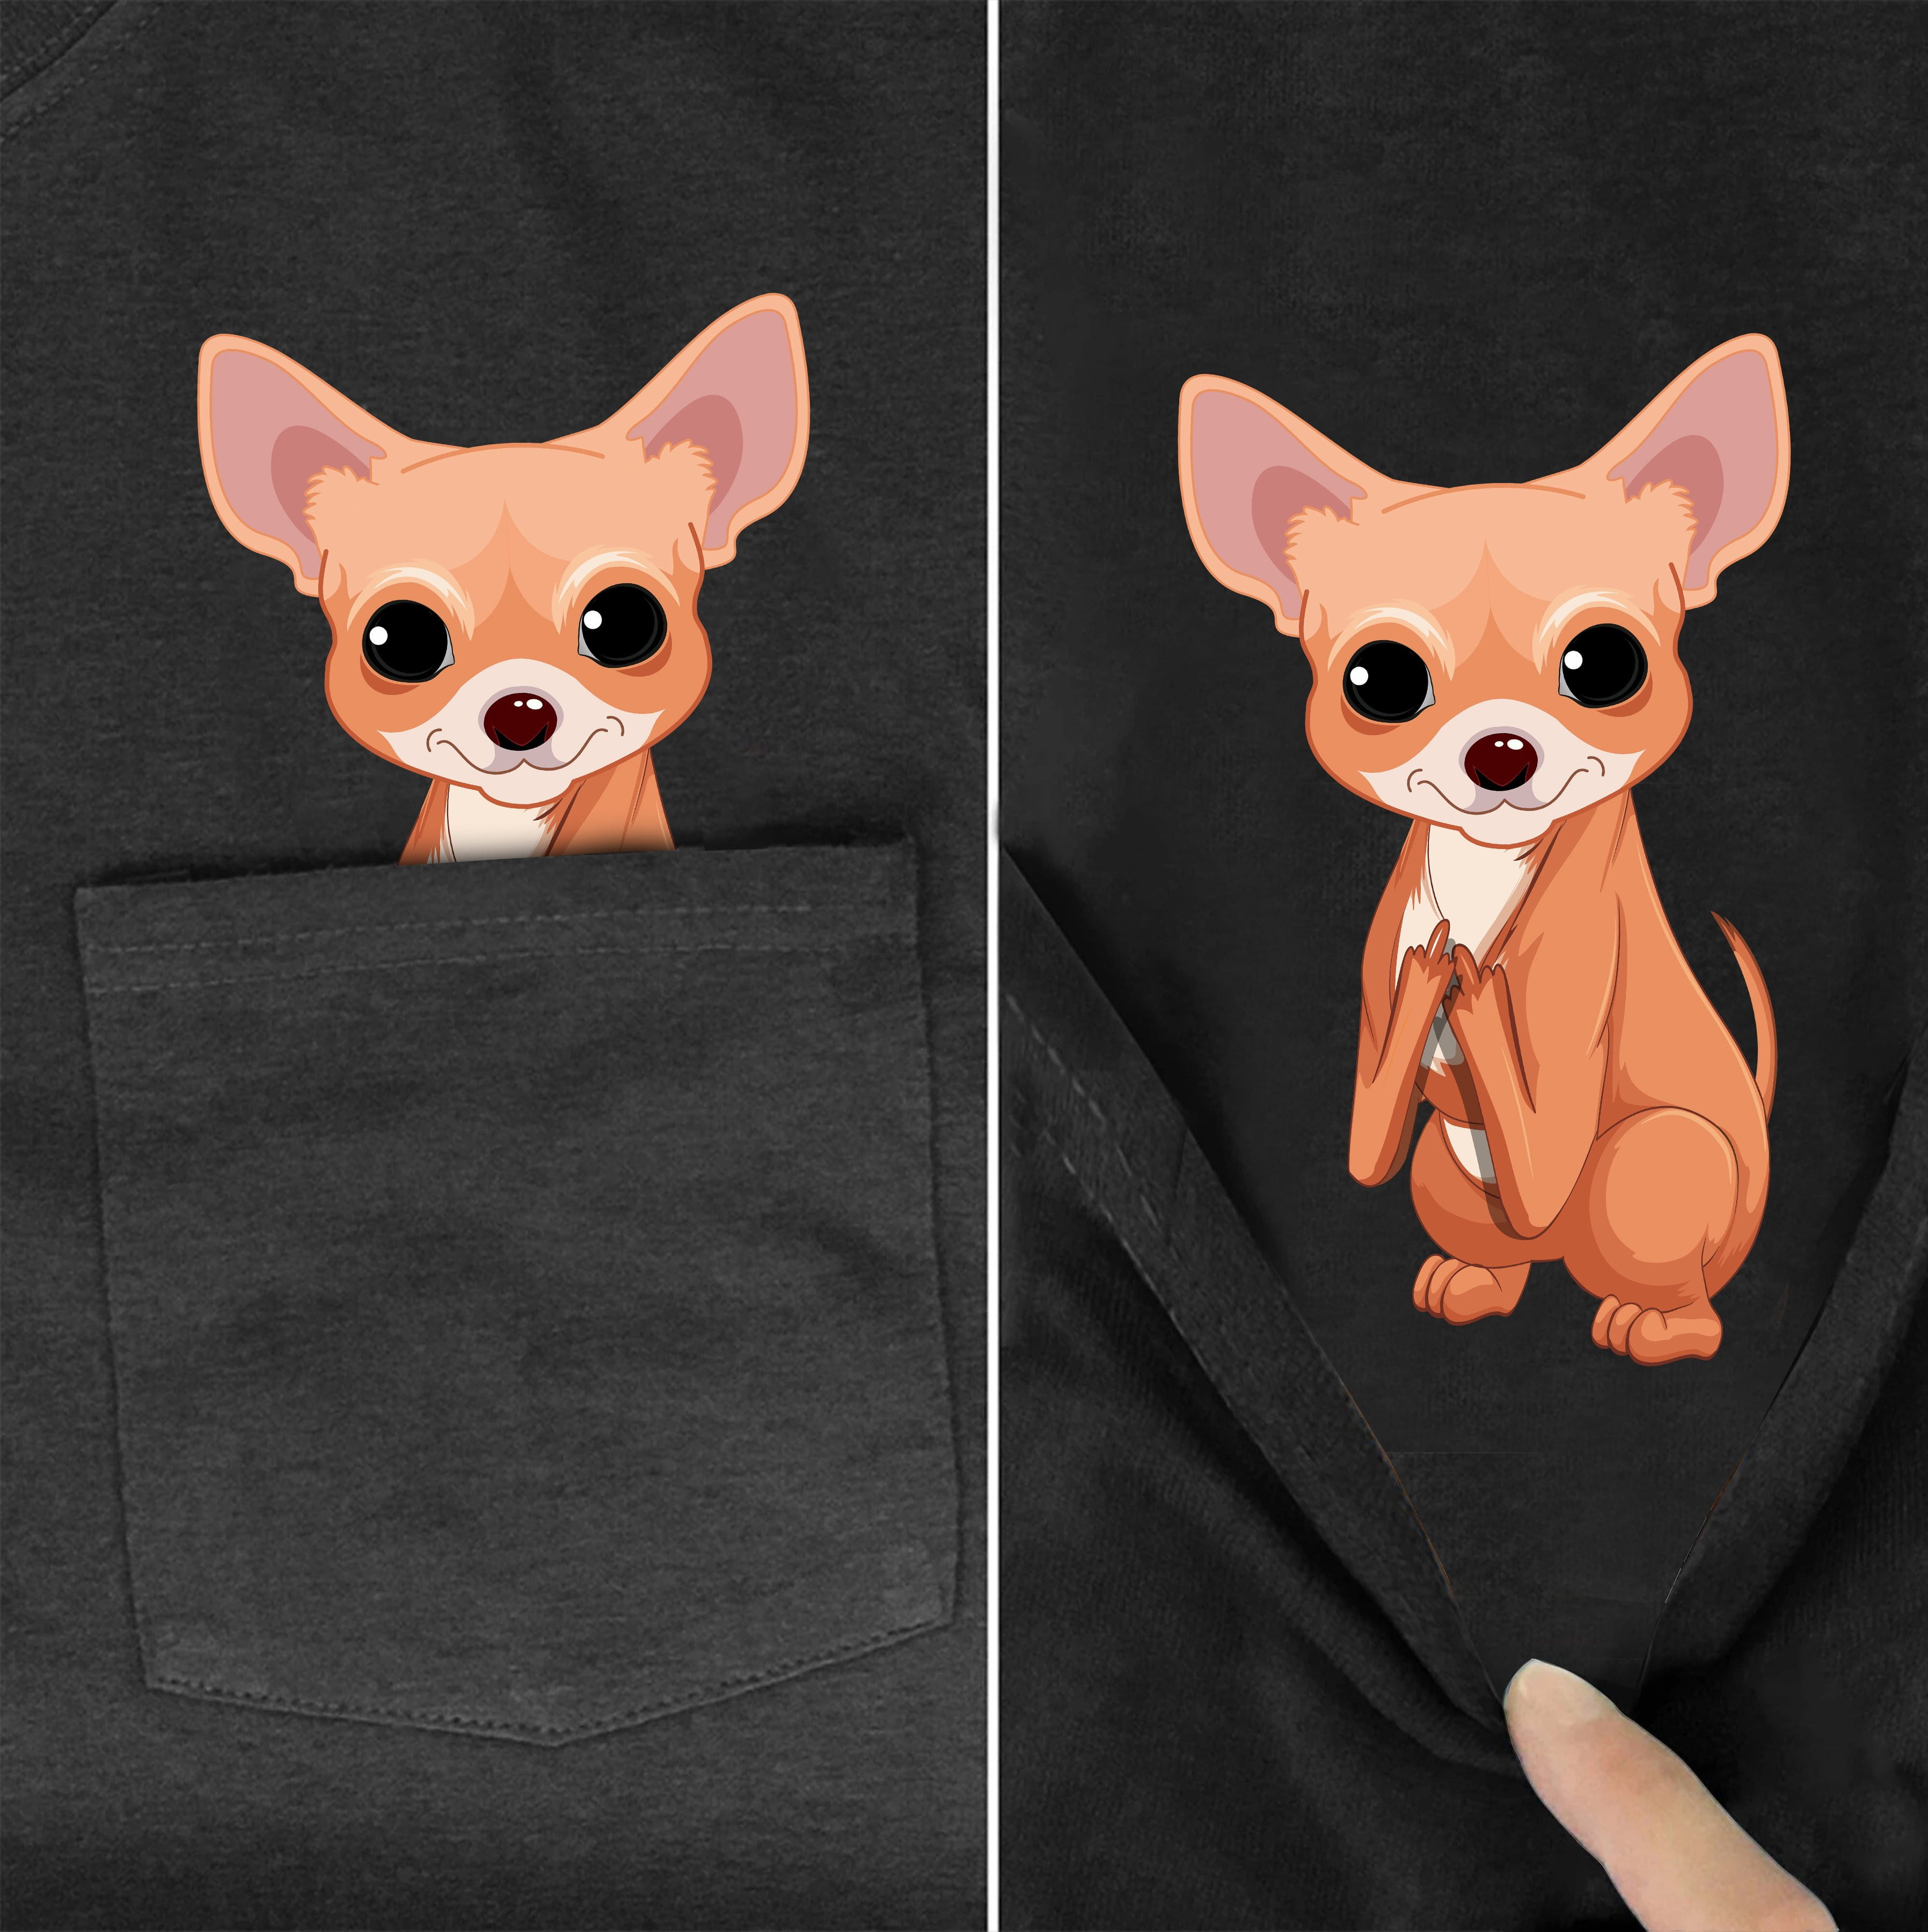 chihuahua in pocket